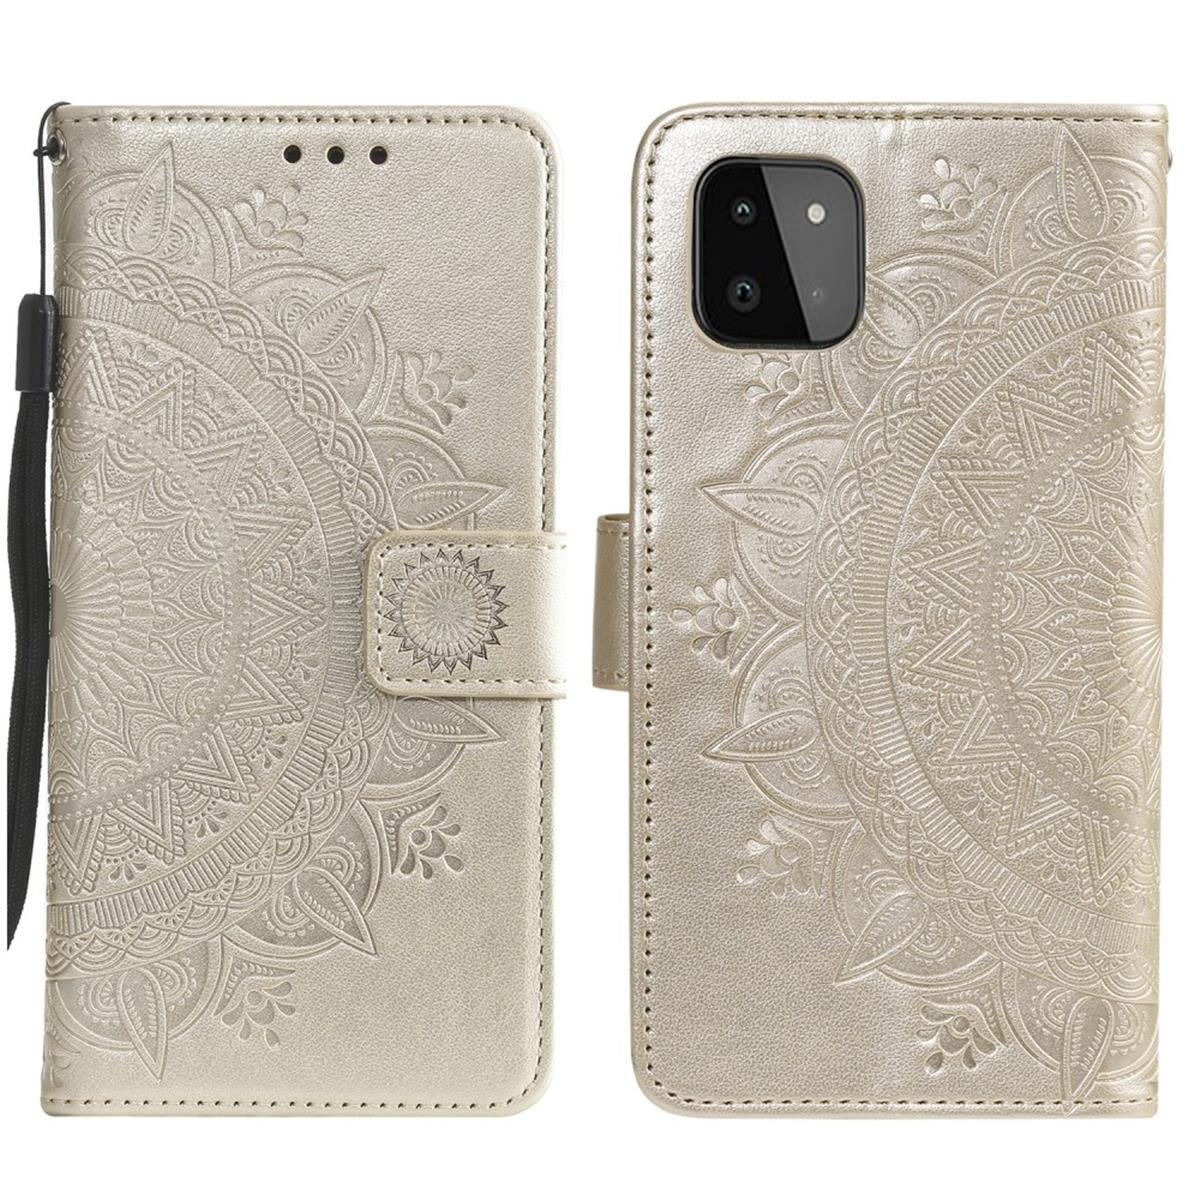 Muster, A22 COVERKINGZ Samsung, Klapphülle Bookcover, Galaxy Gold mit 5G, Mandala